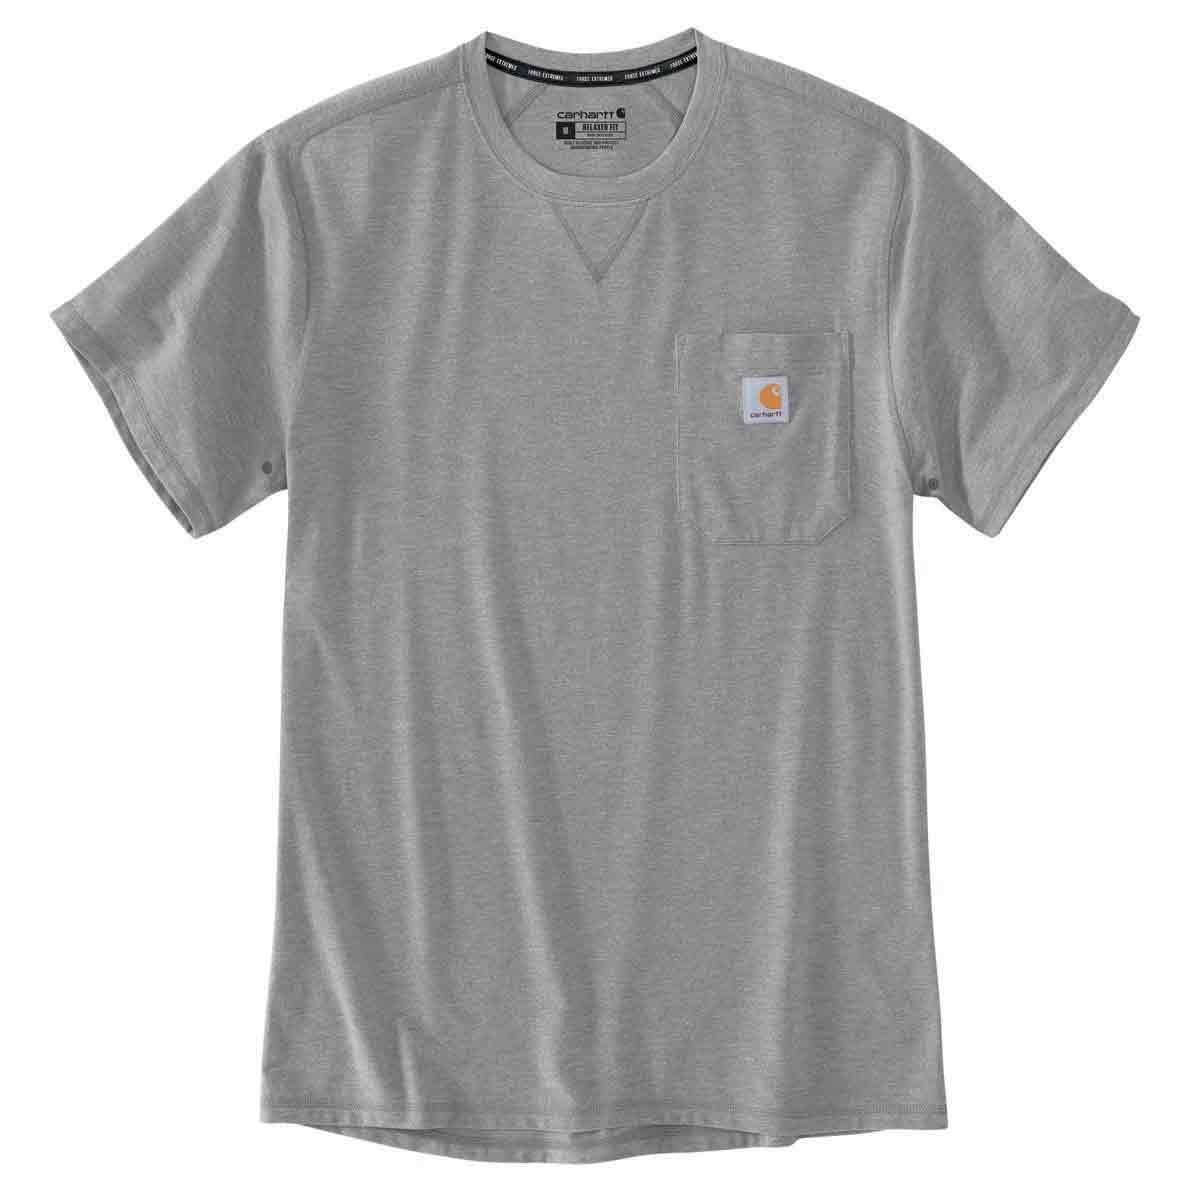 Carhartt Men's Force Extremes Relaxed Fit Lightweight SS Pocket T-Shirt